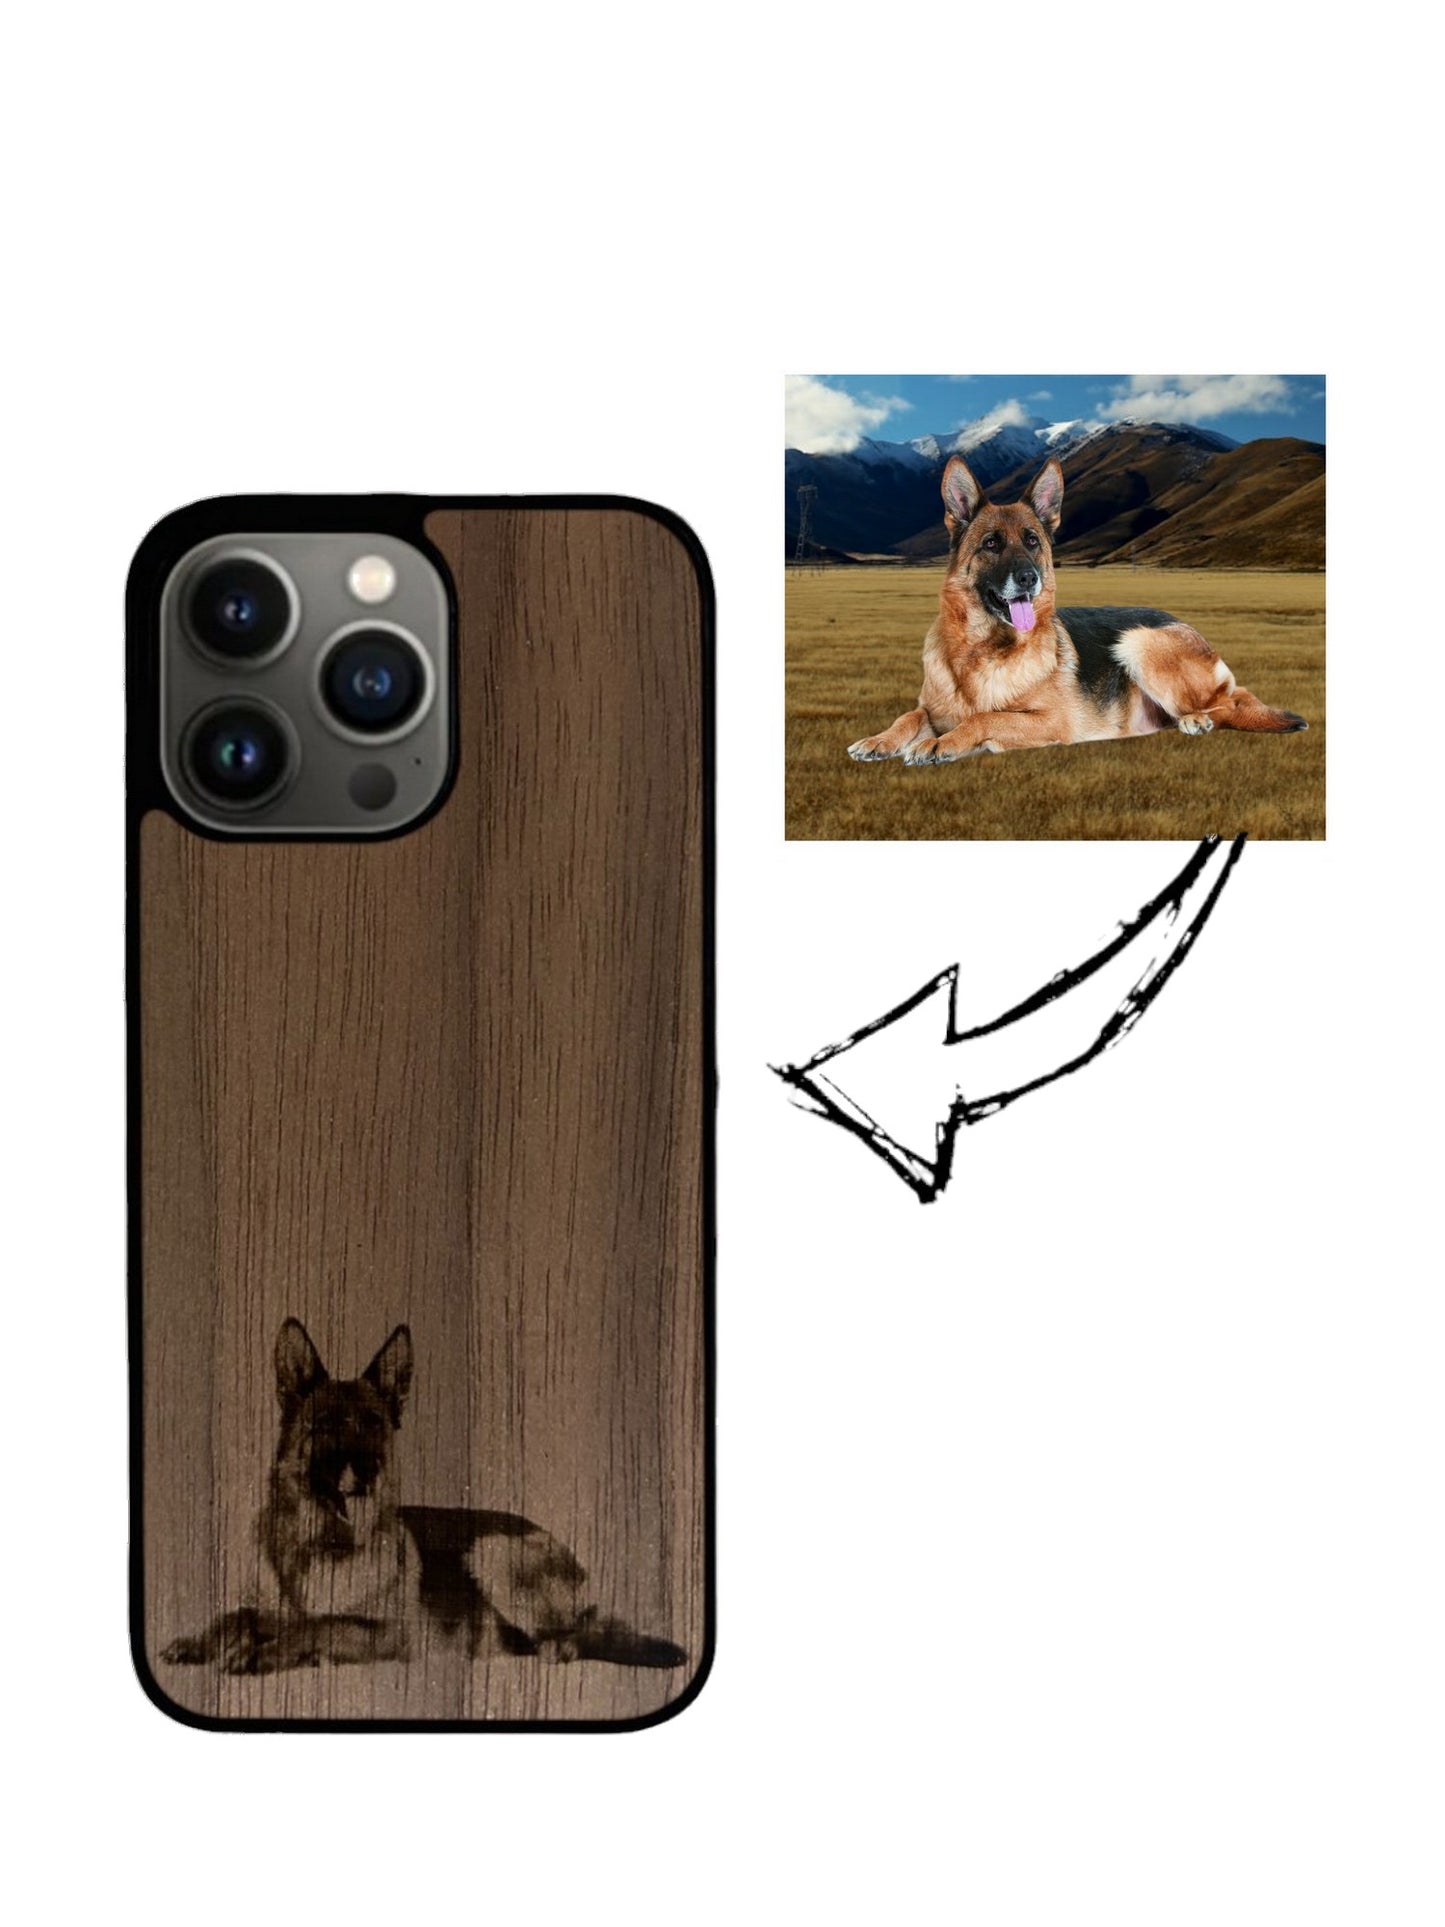 Iphone case - the photo